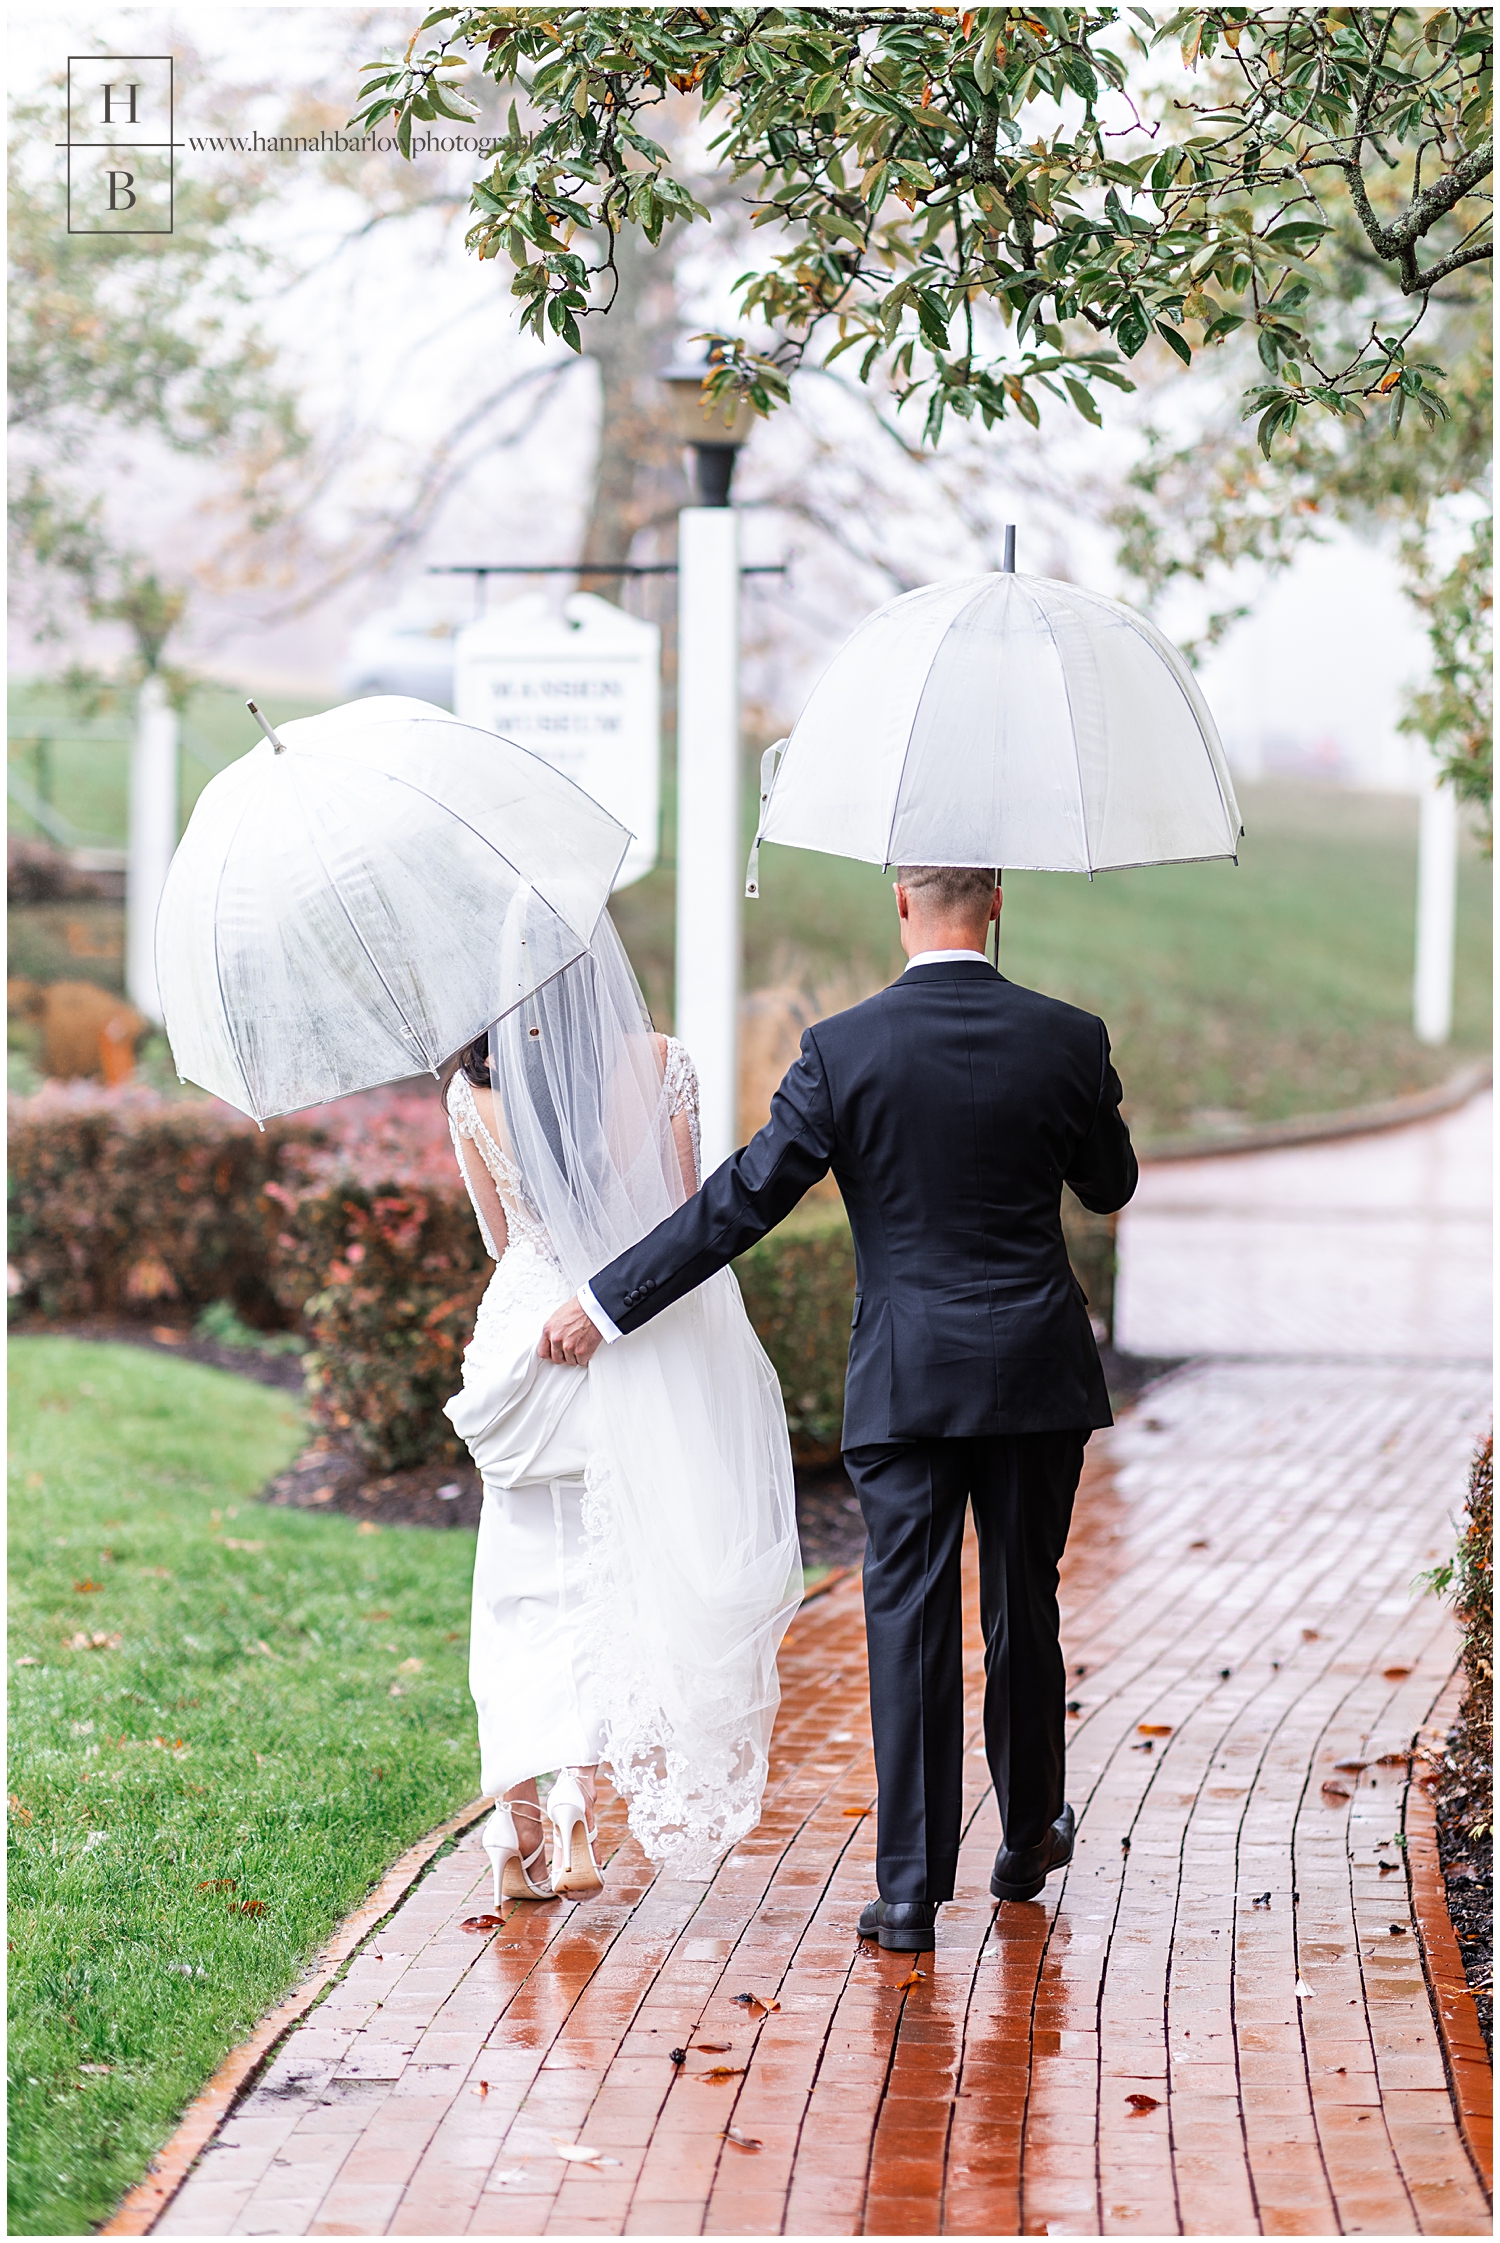 Groom holds bride's train and umbrellas for wedding photo